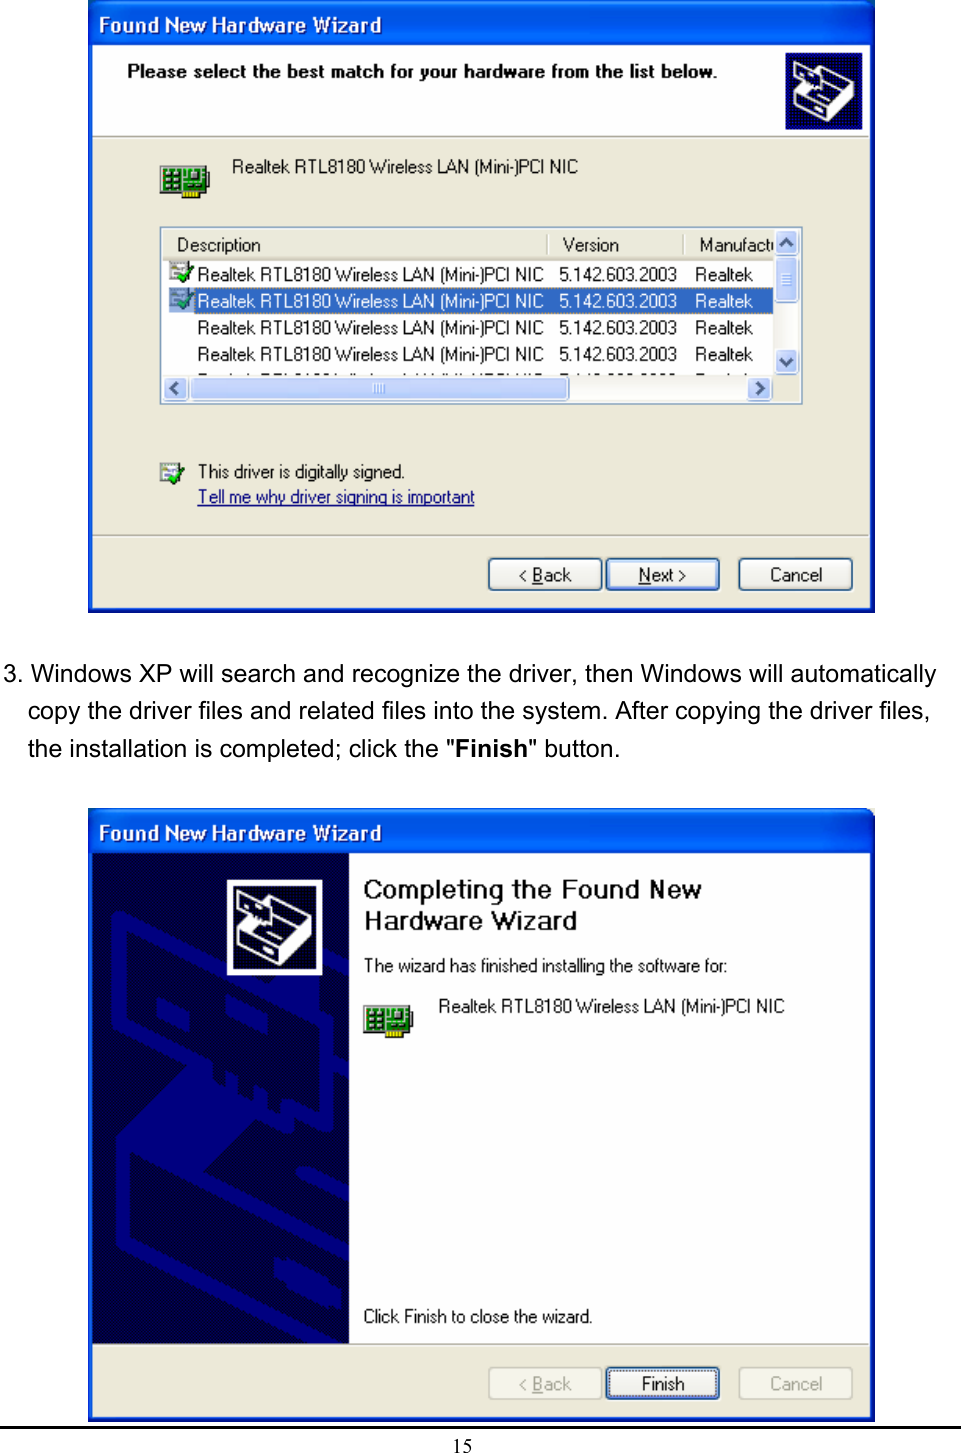  15   3. Windows XP will search and recognize the driver, then Windows will automatically copy the driver files and related files into the system. After copying the driver files, the installation is completed; click the &quot;Finish&quot; button.     